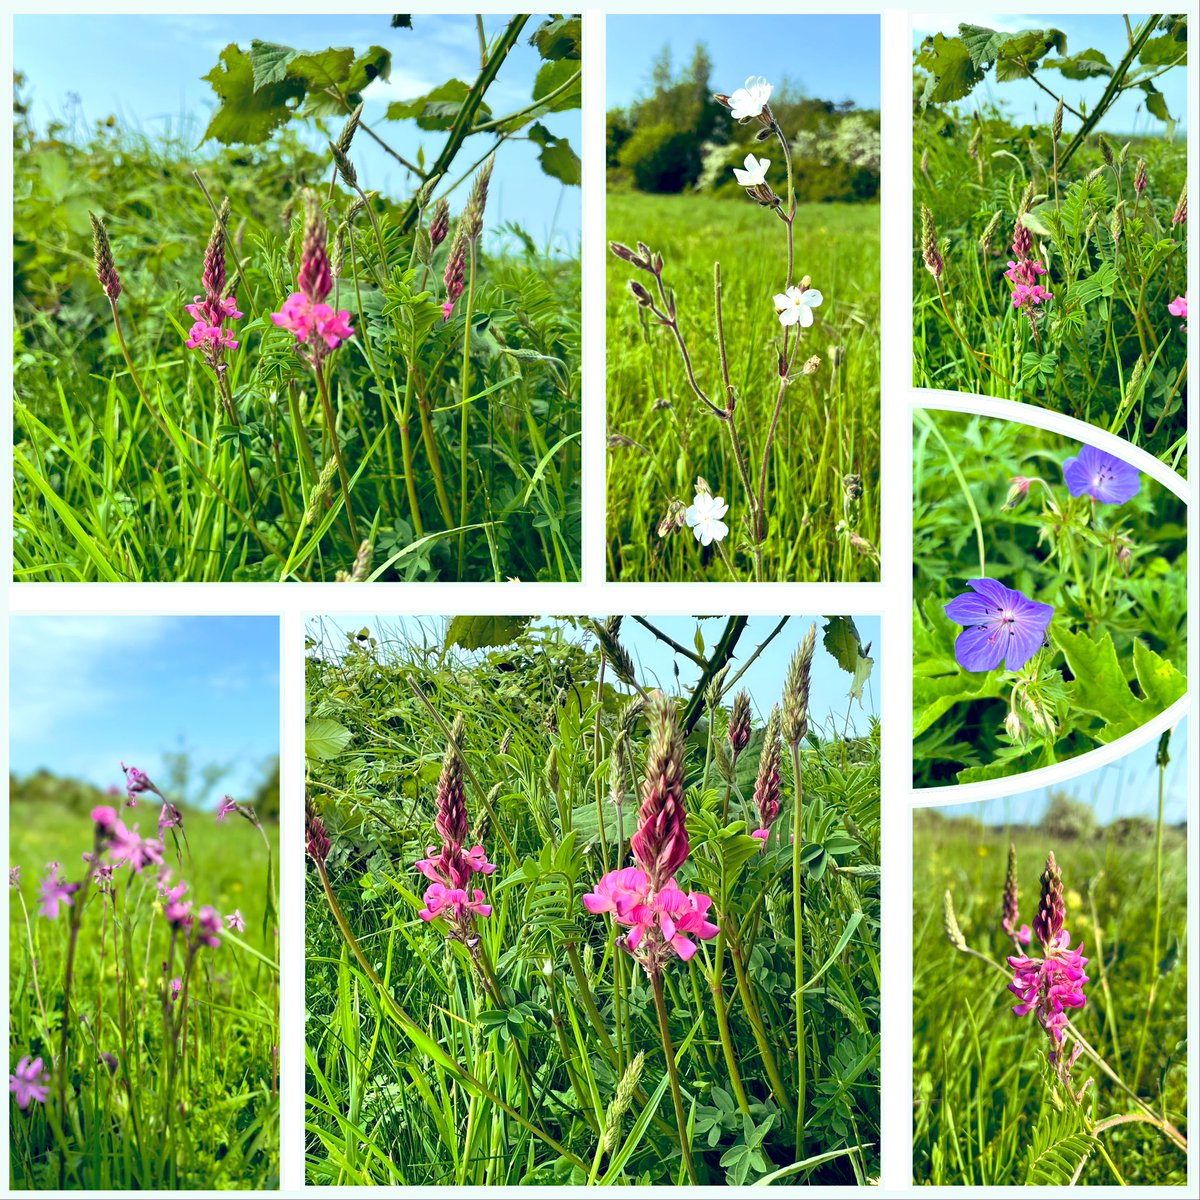 South Downs. First sainfoin, white campion, meadow cranesbill & ragged robin on this lovely chalk downland #WildflowerHour @BSBIbotany